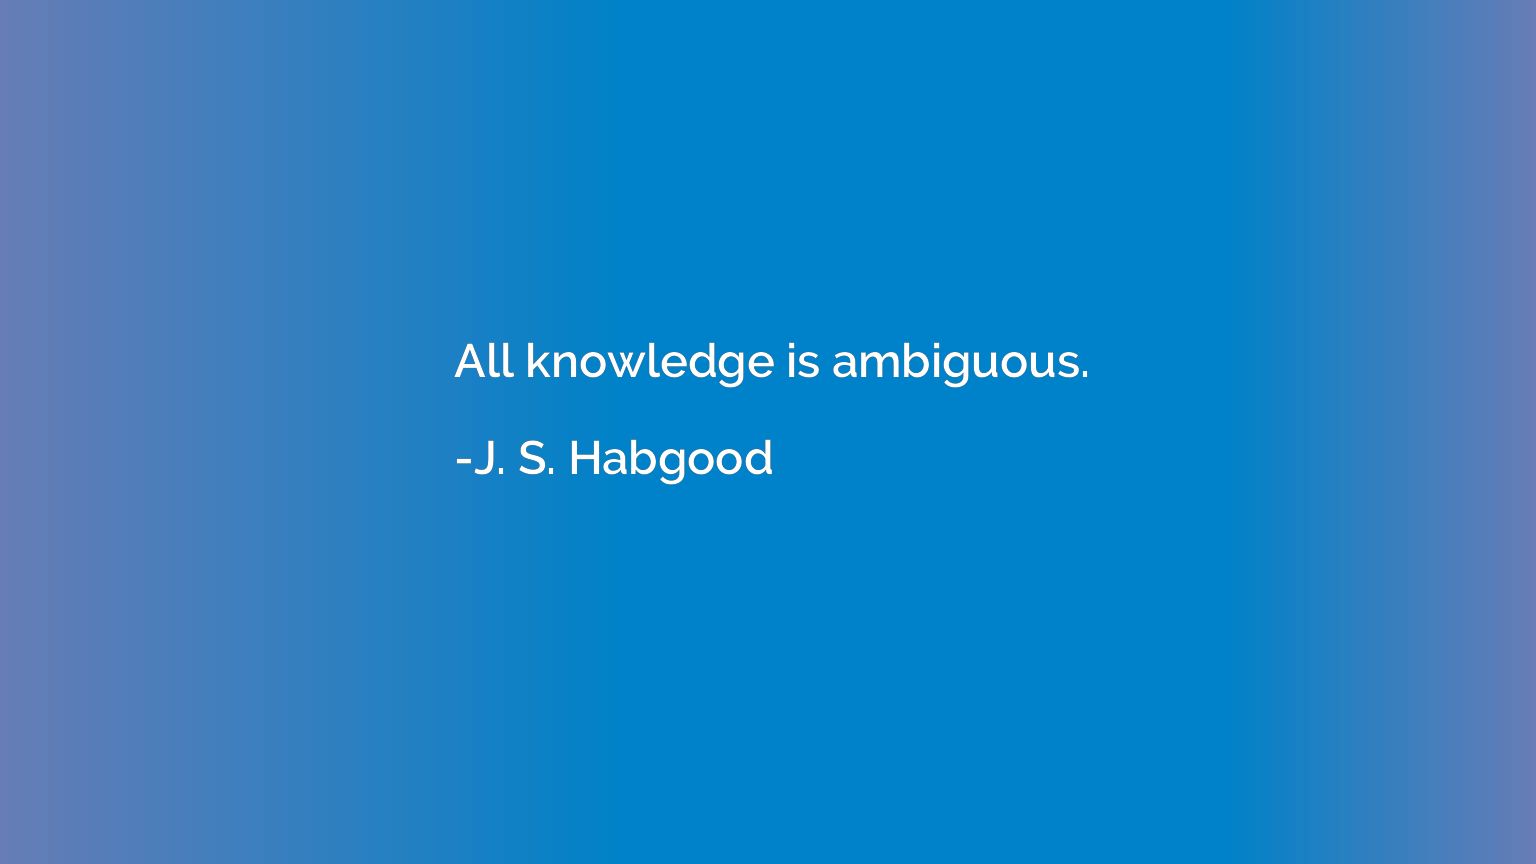 All knowledge is ambiguous.